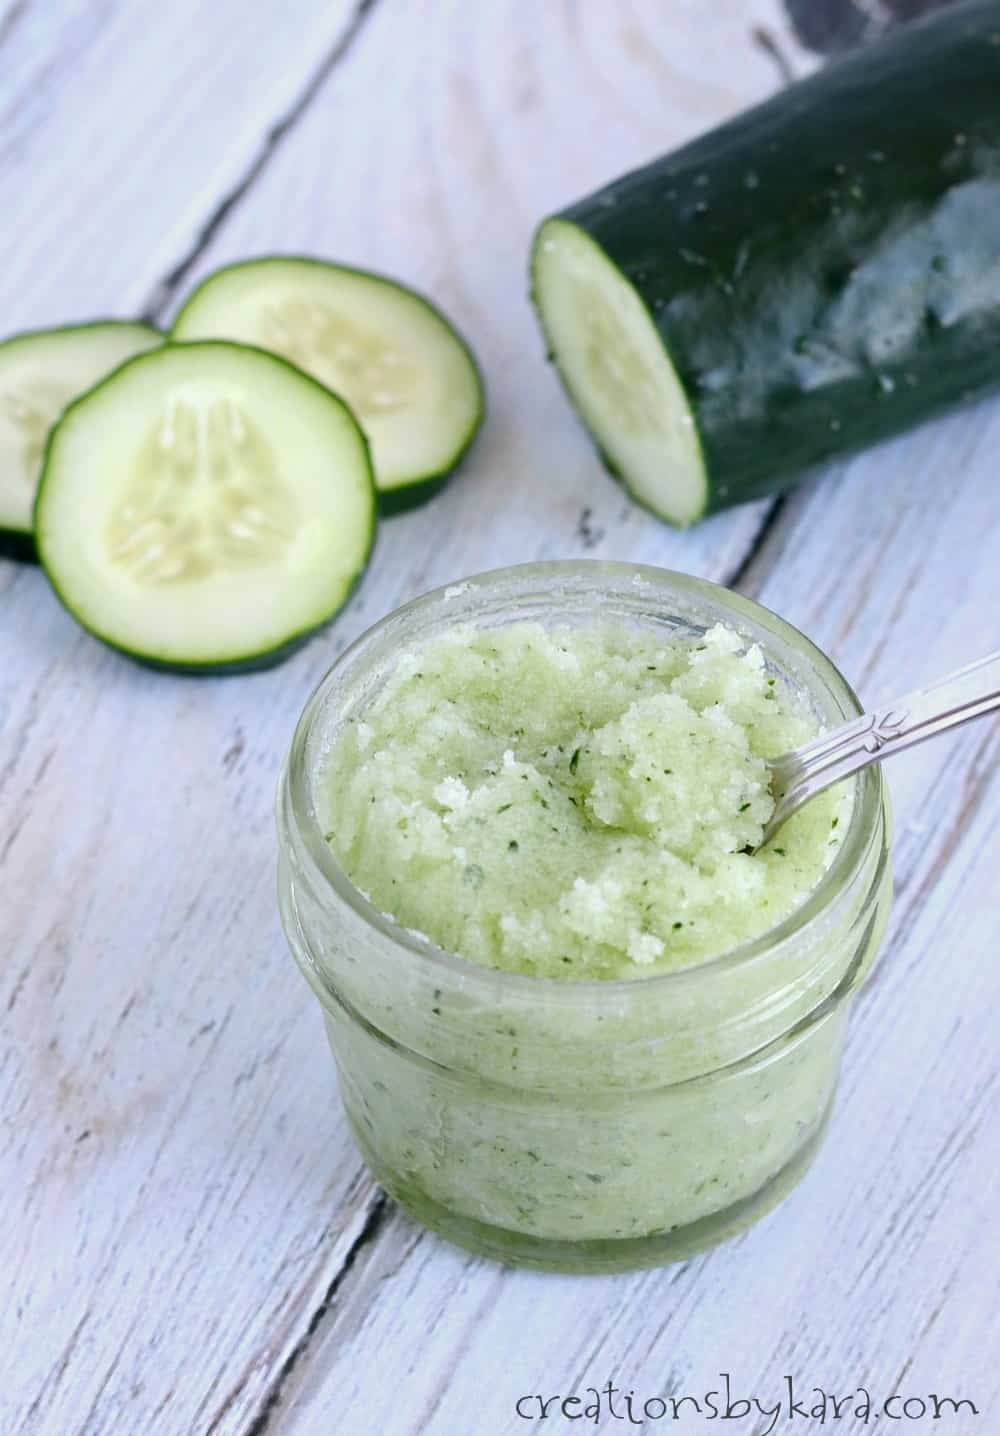 Use extra mint from your garden to make this cucumber and mint sugar scrub at Creations by Kara